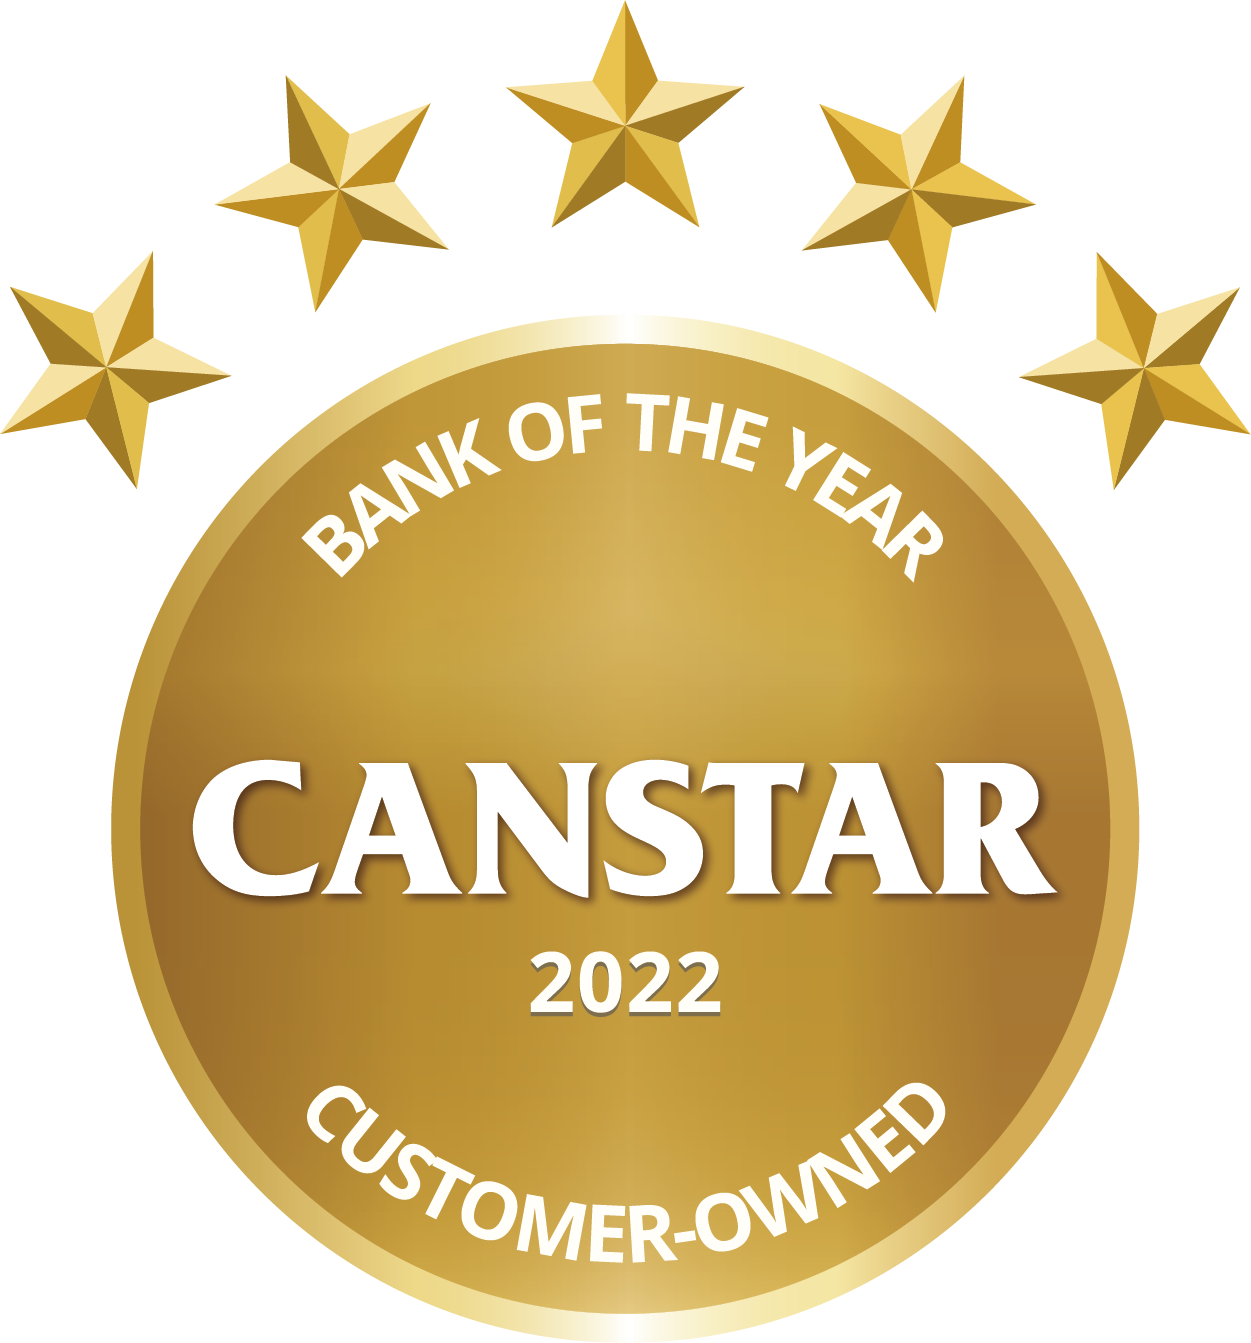 Canstar Awards 2022 - Customer-Owned Bank of the Year